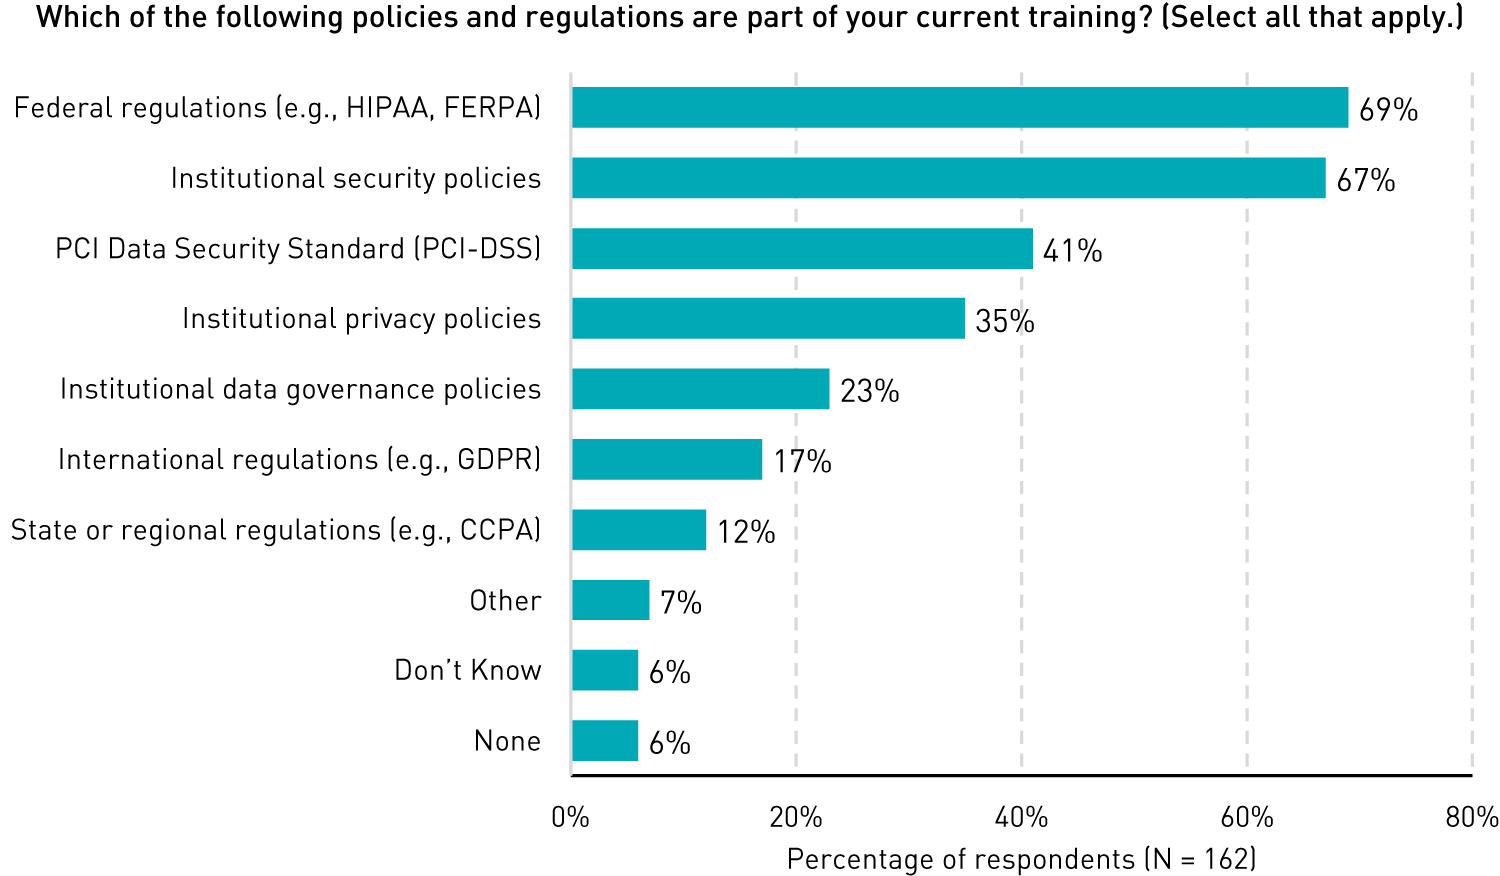 Bar chart showing percentages of training programs that include specific types of policies and regulations: federal regulations (69%), institutional security policies (67%), PCI Data Security Standard (41%), institutional privacy policies (35%), institutional data governance policies (23%), international regulations (17%), state or regional regulations (12%), other (7%), don’t know (6%), and none (6%). 